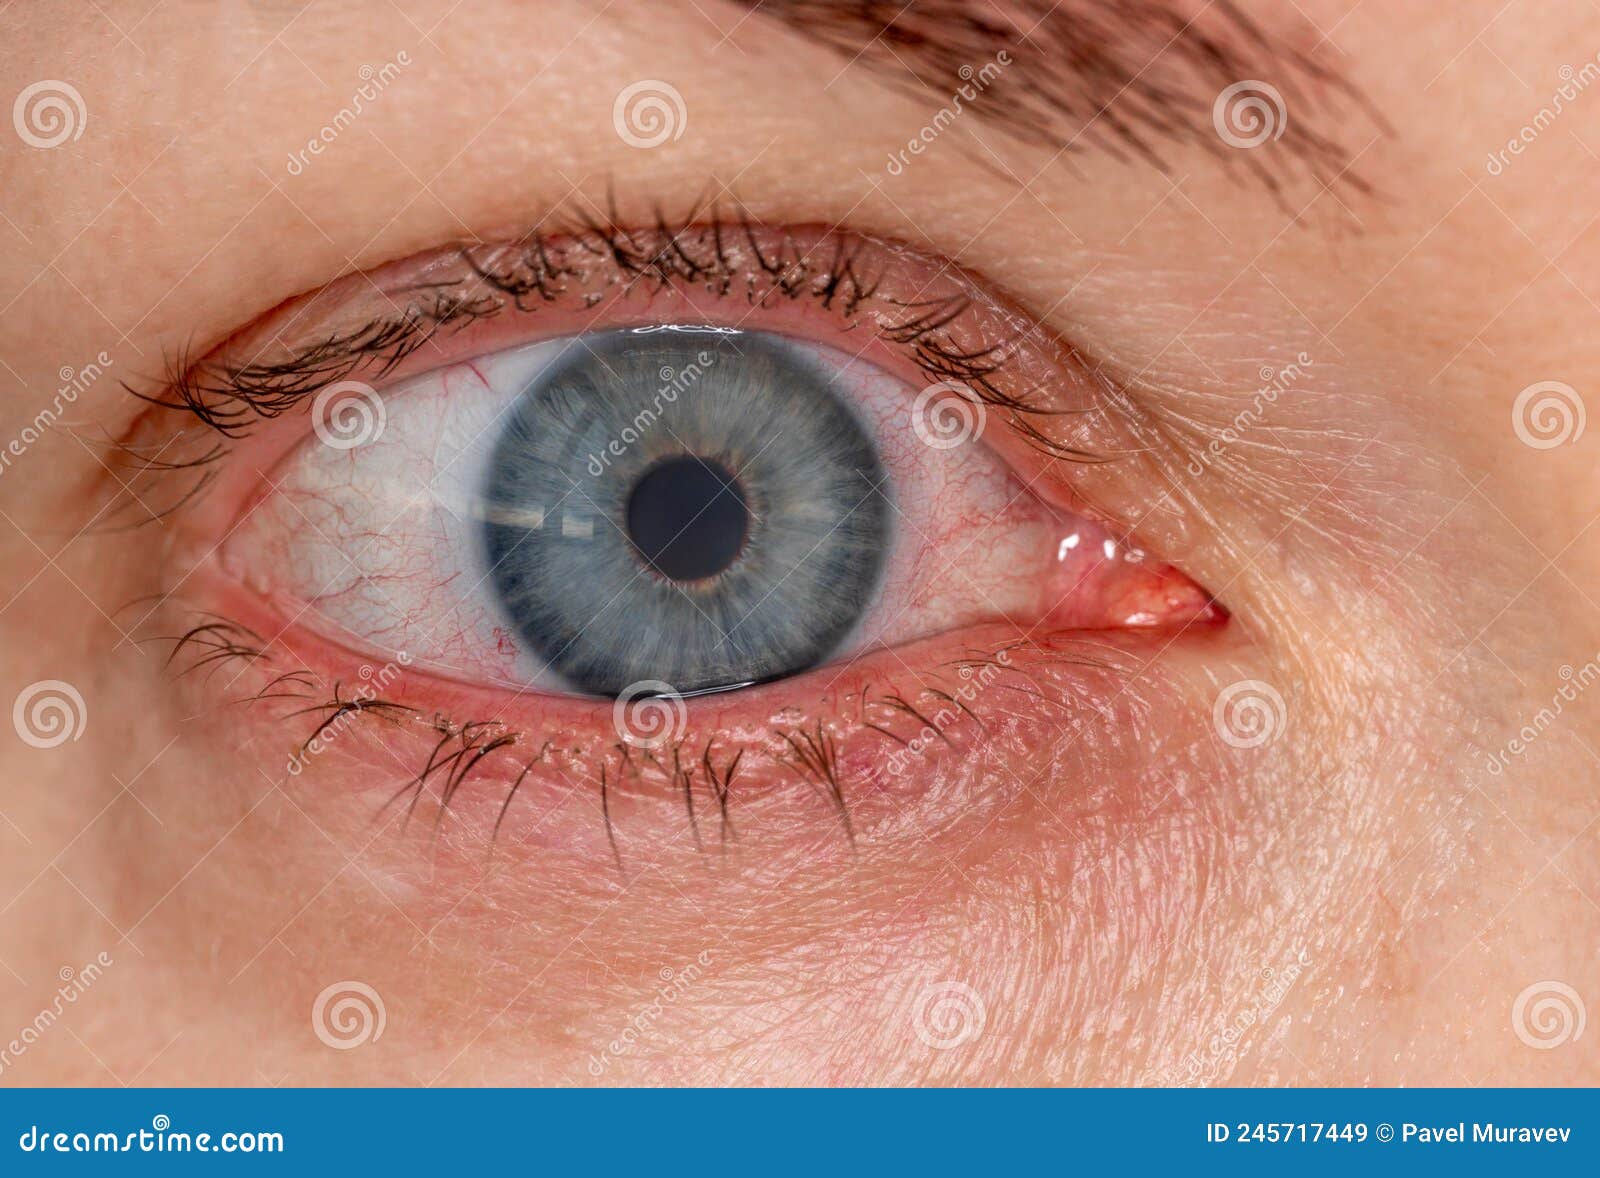 Red Inflamed Eye with Contact Lens, Close-up Macrophoto. Dilation of Blood  Vessels of Eye, Strain from Computer. Treating Dry and Stock Image - Image  of blood, medical: 245717449